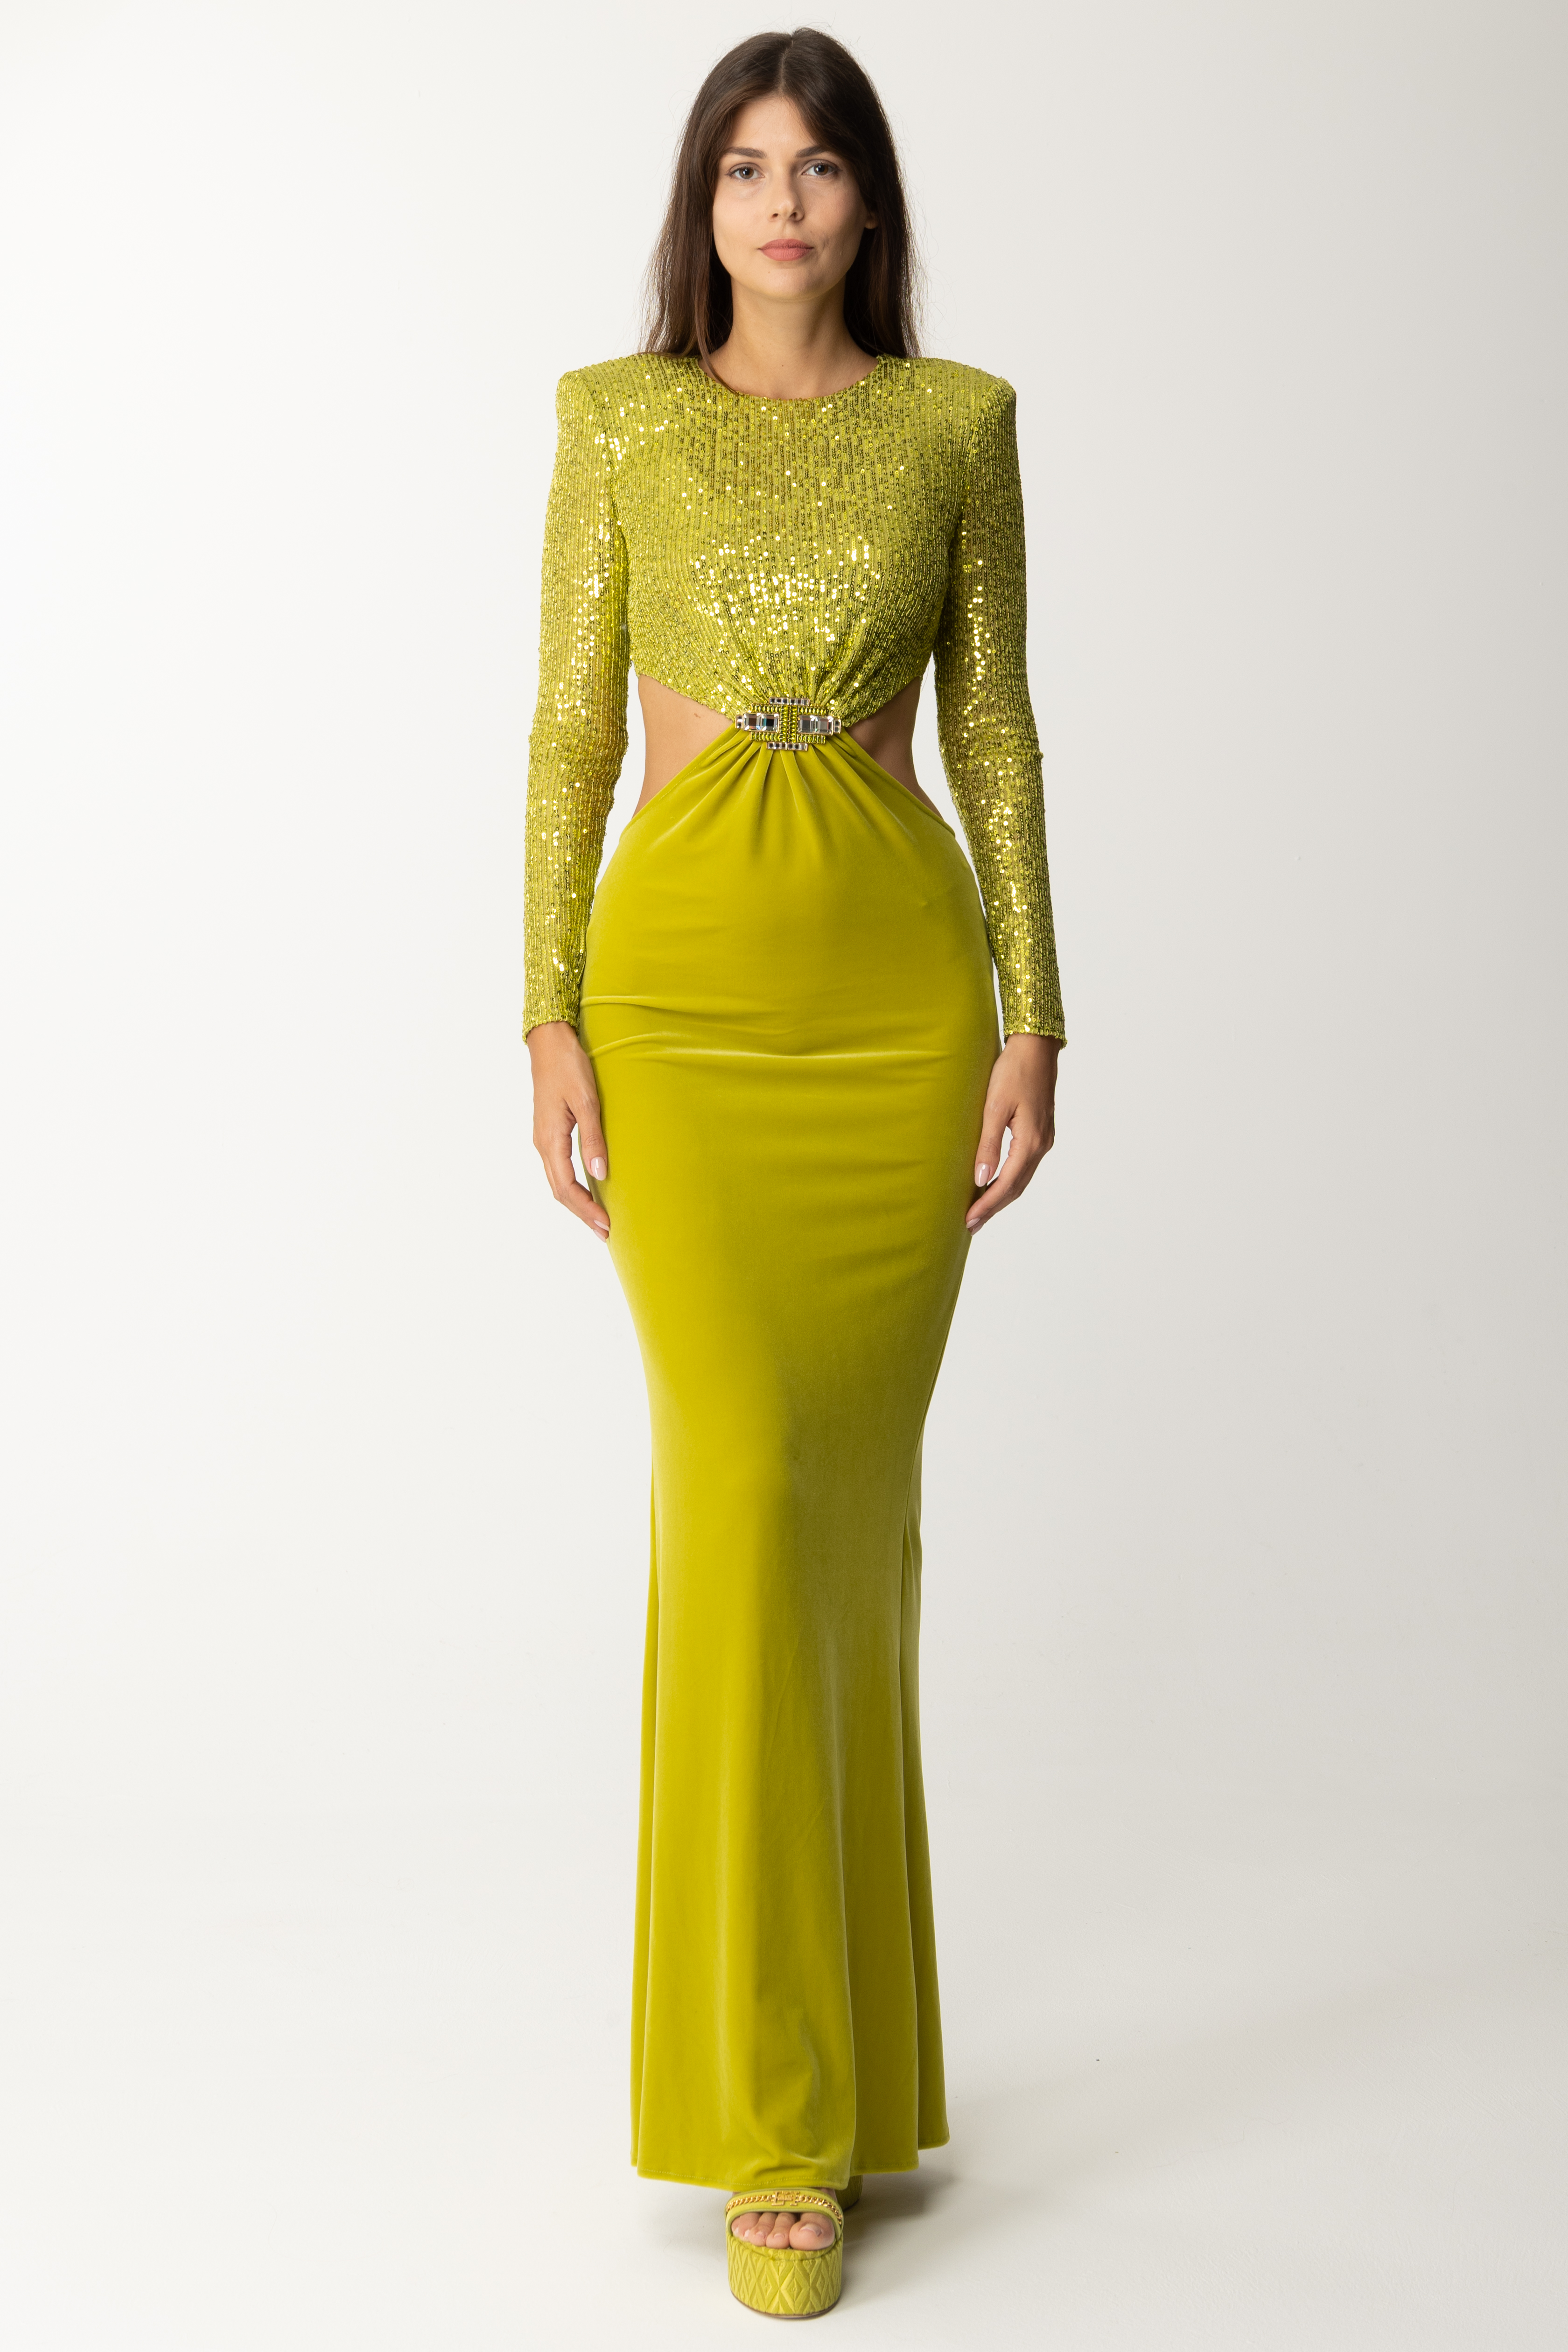 Preview: Elisabetta Franchi Red Carpet Dress with Embroidered Top and Cut-Out OLIVE OIL